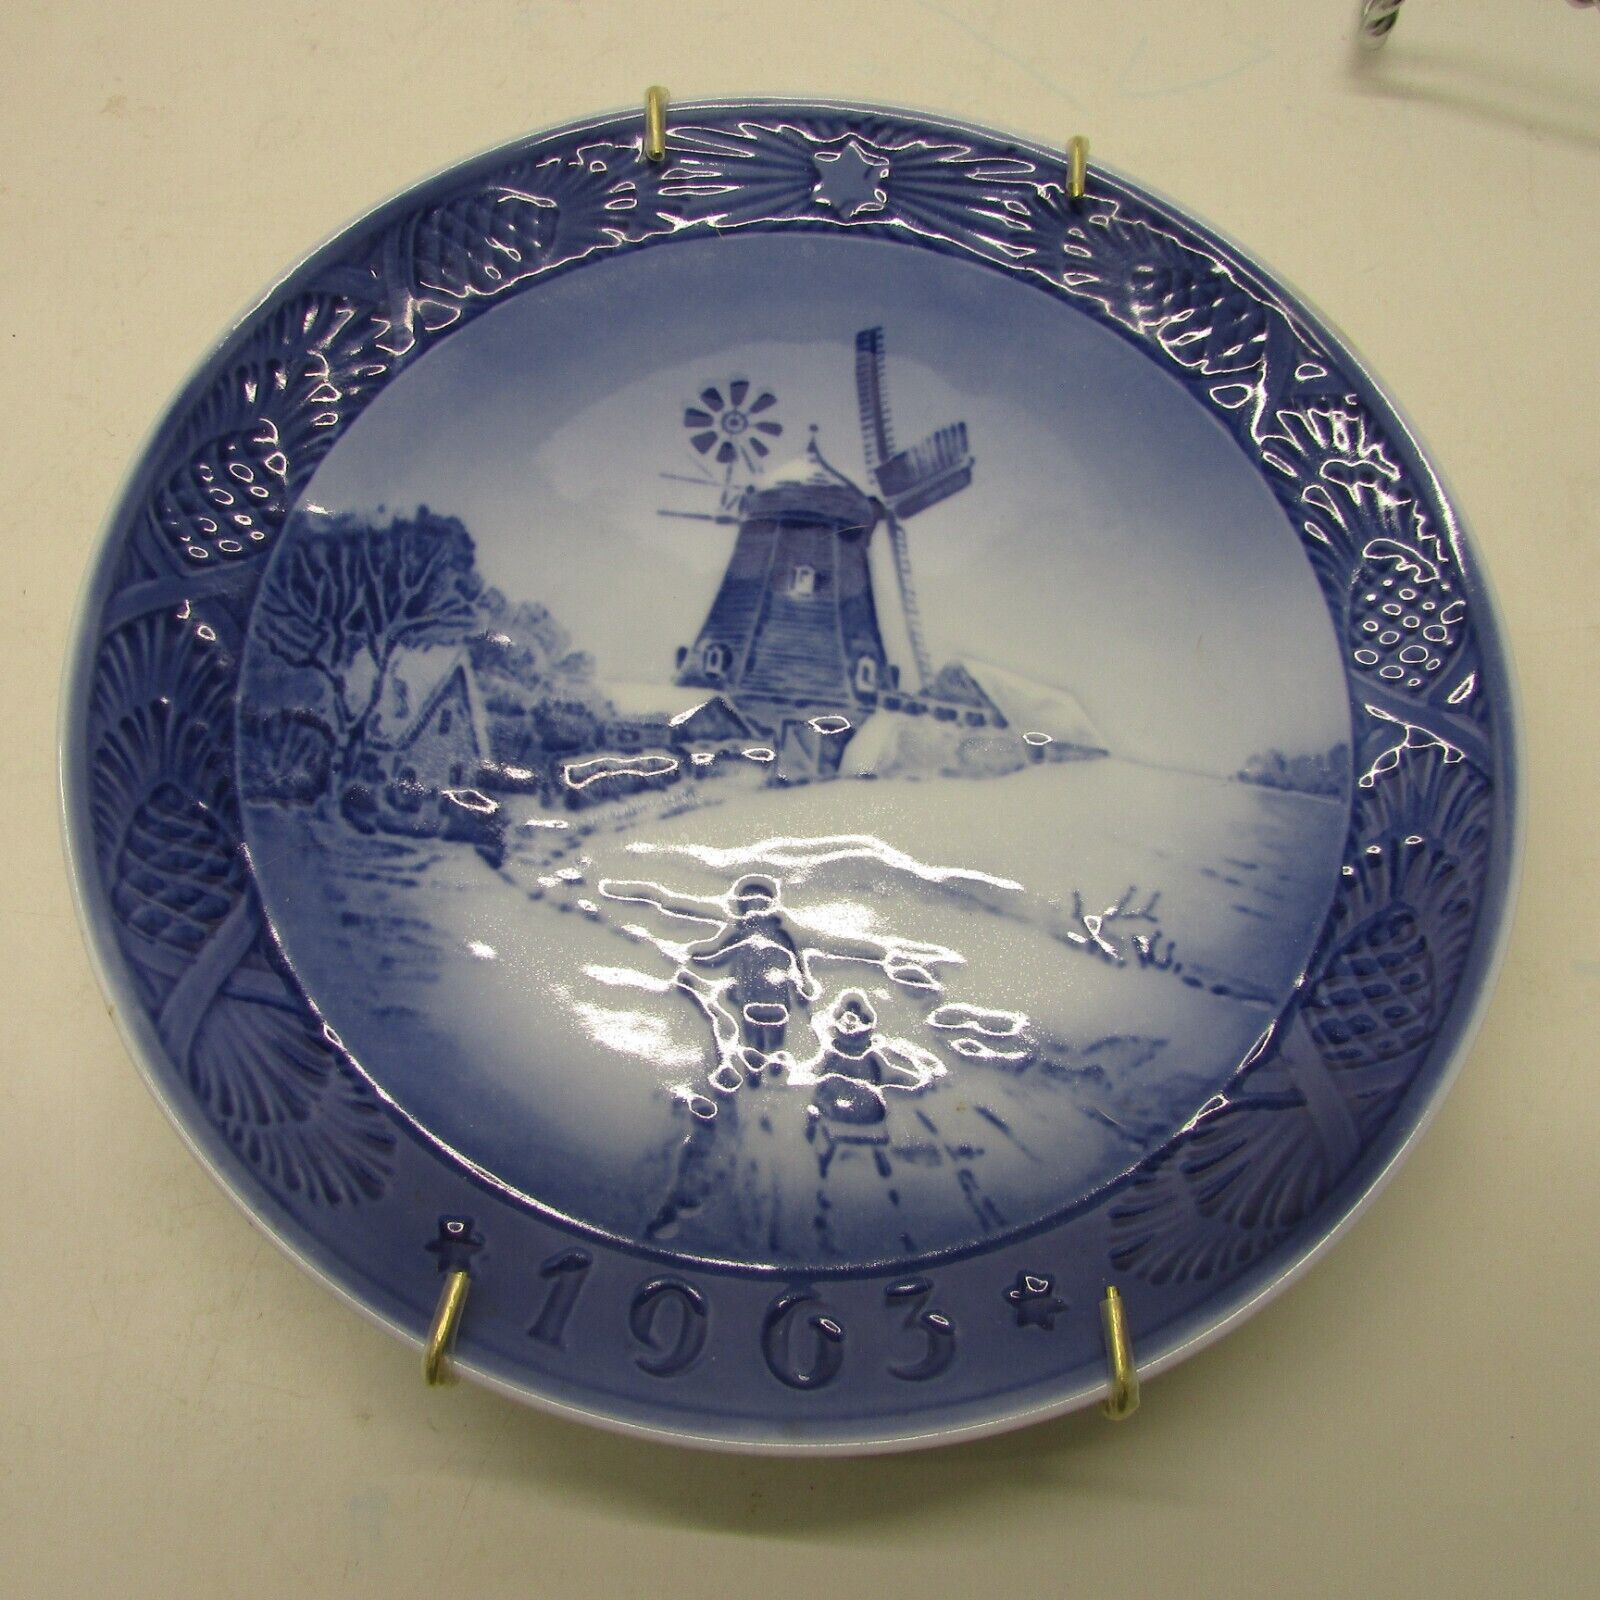 1960- 1969 Royal Copenhagen 7-inch Blue and White Porcelain Collector Plates